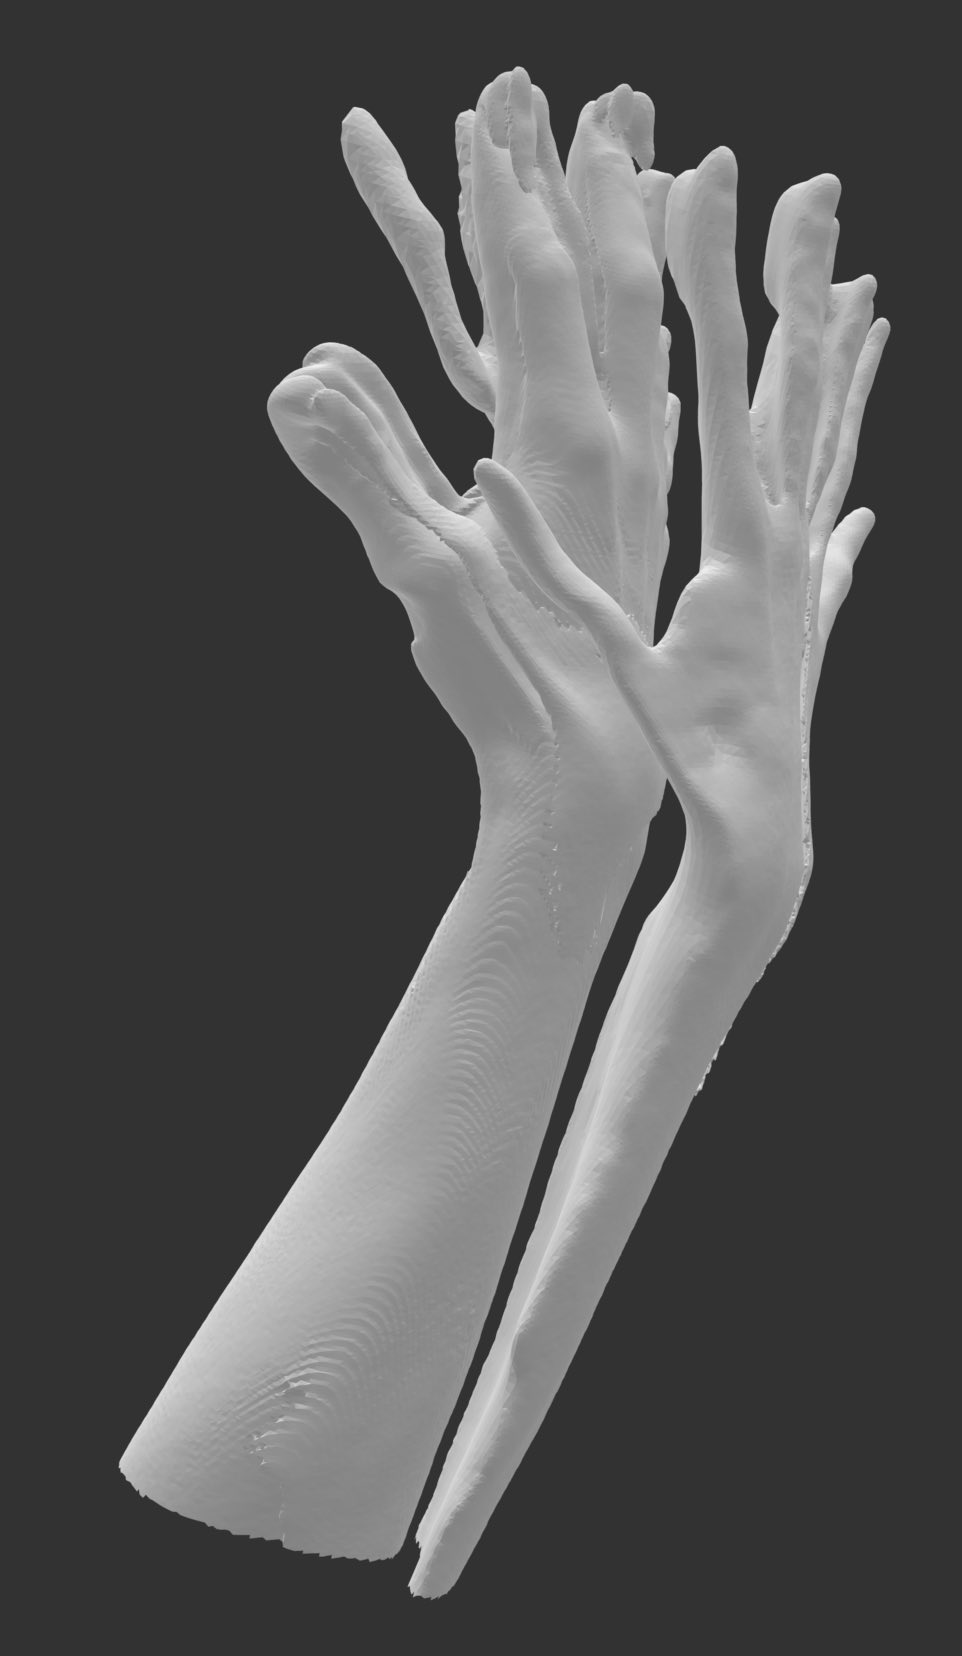 Blob-finger hand (too much movement)